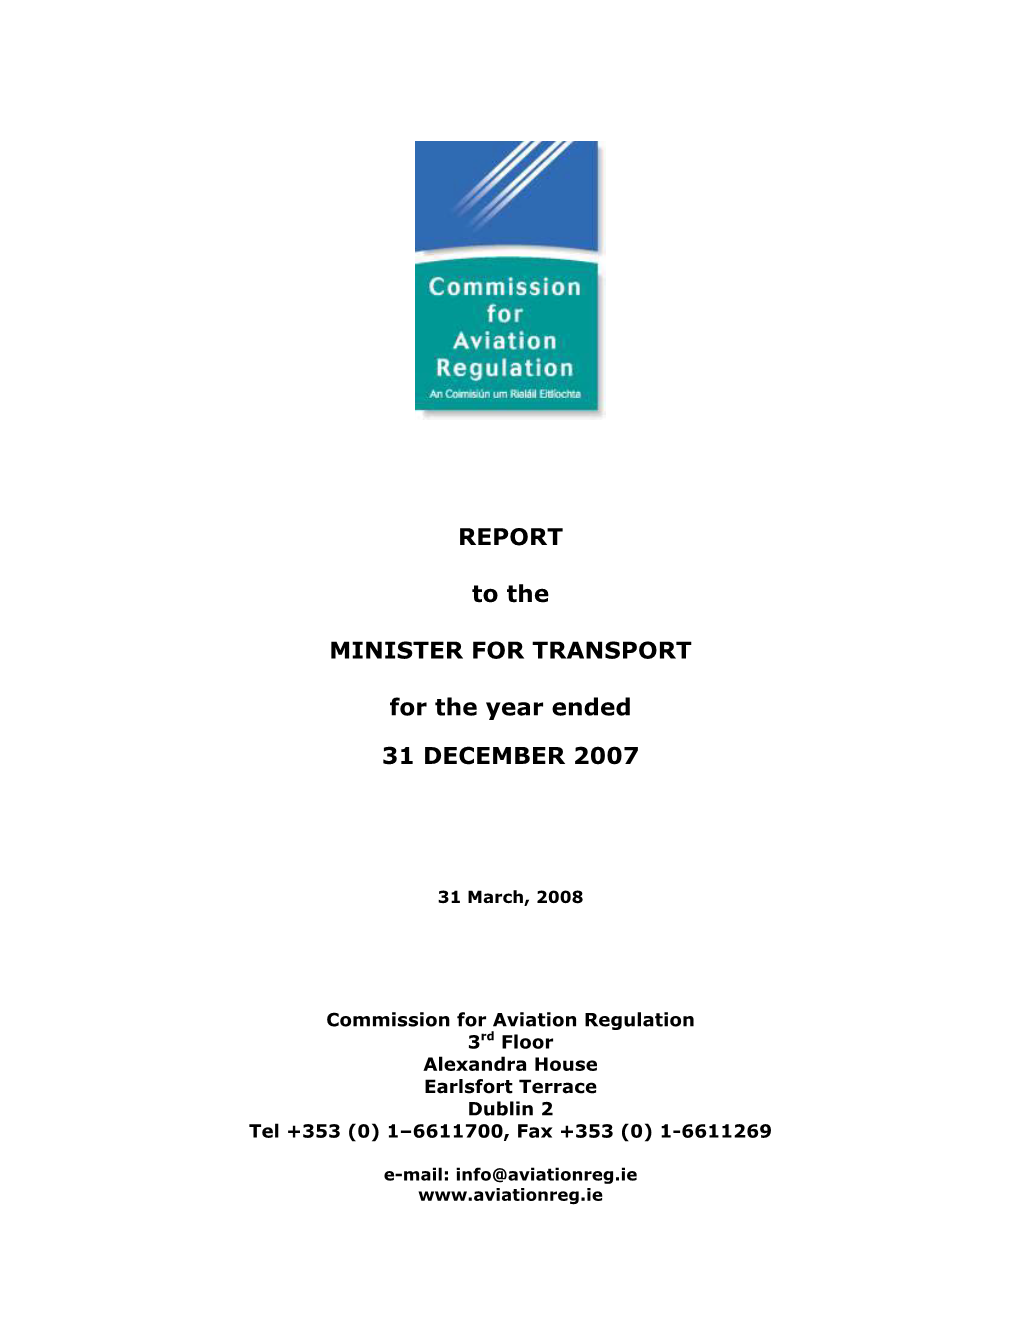 2007 Annual Report to the Minister